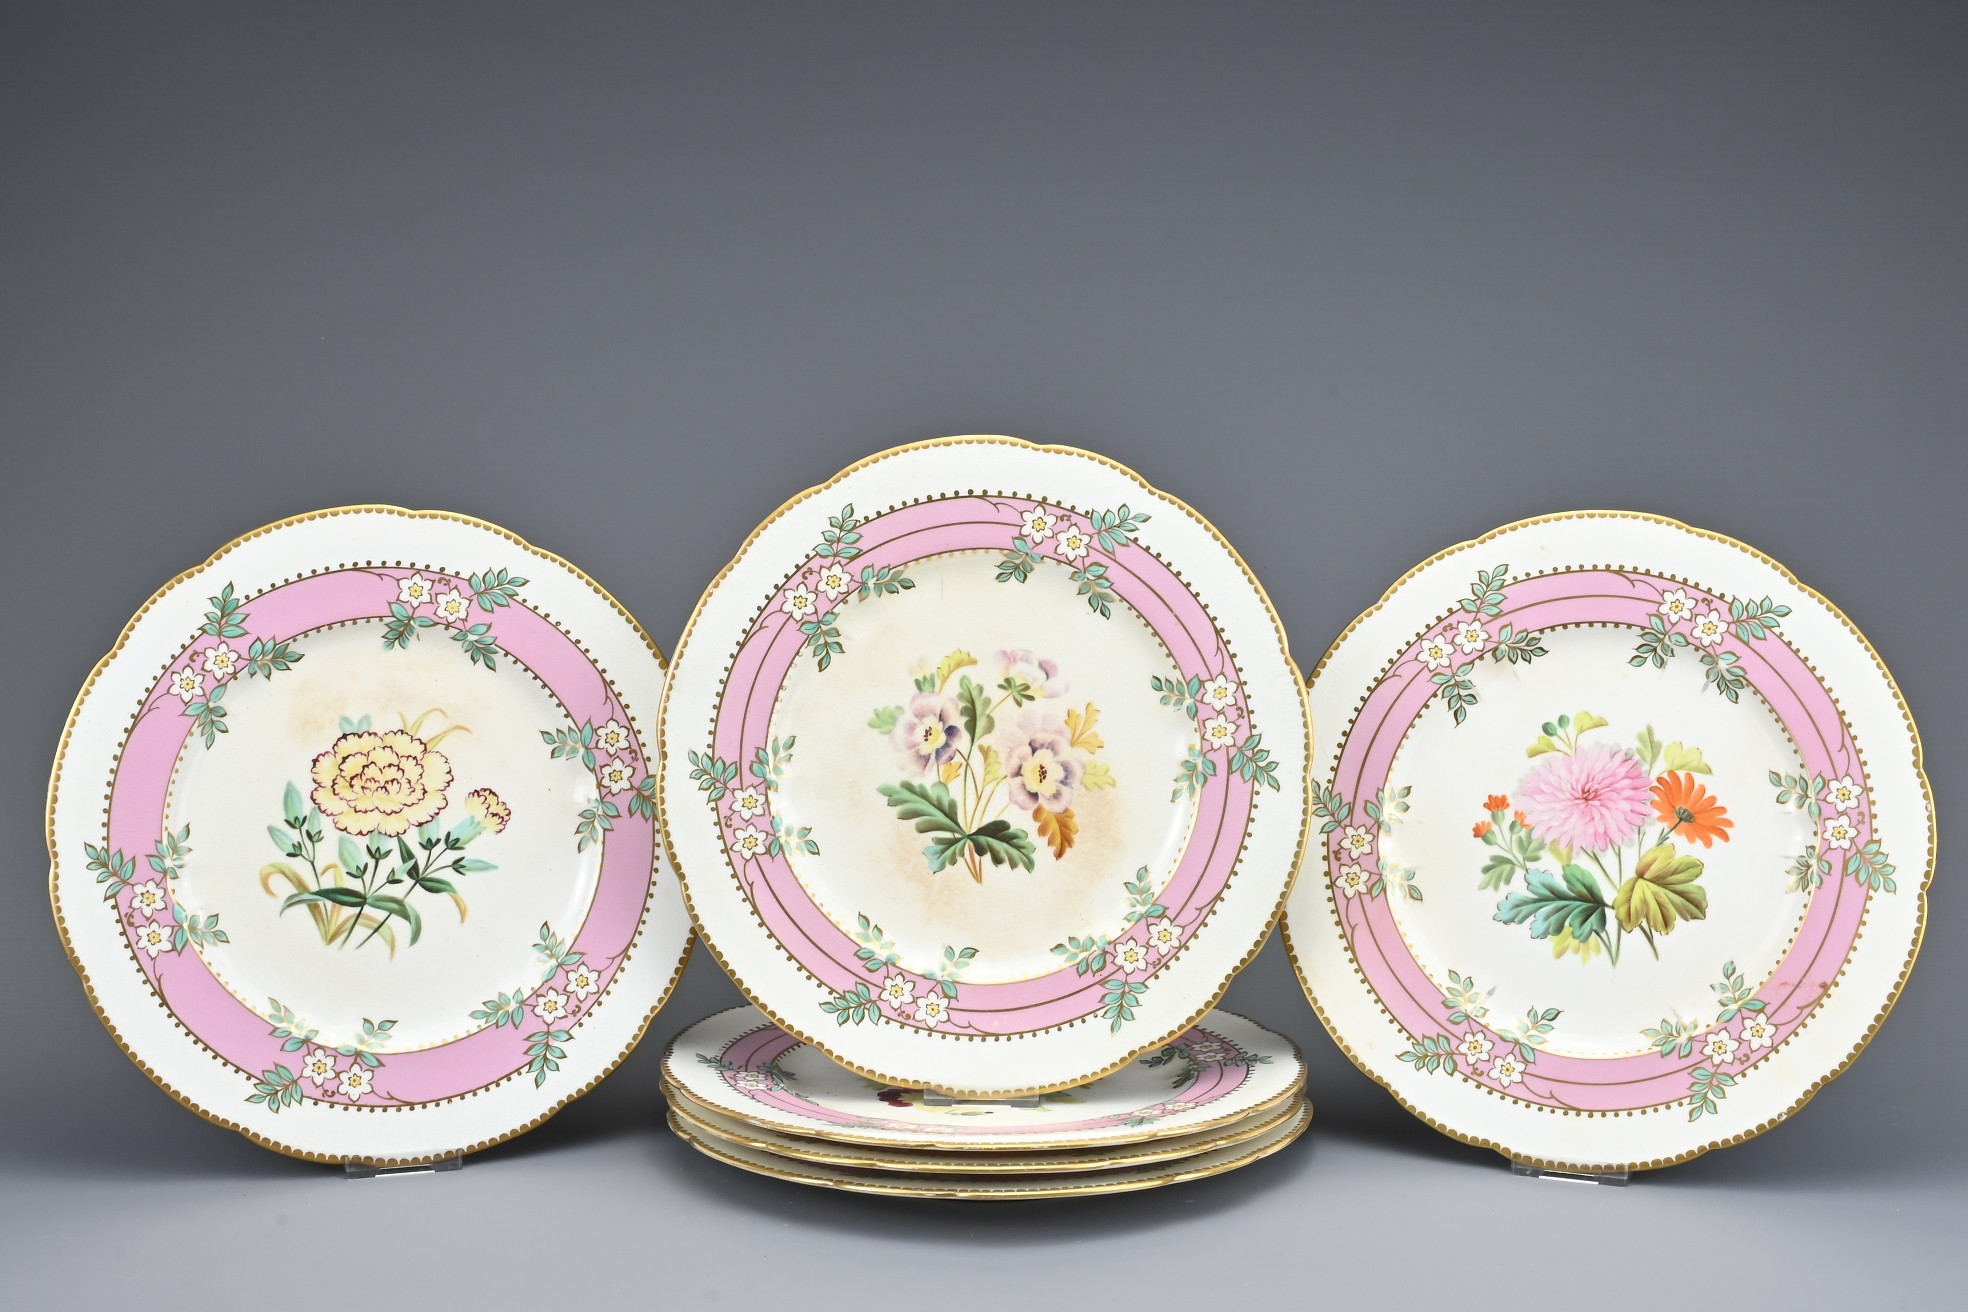 SET OF SIX VICTORIAN PORCELAIN DESSERT PLATES with a floral and gilt border surrounding central